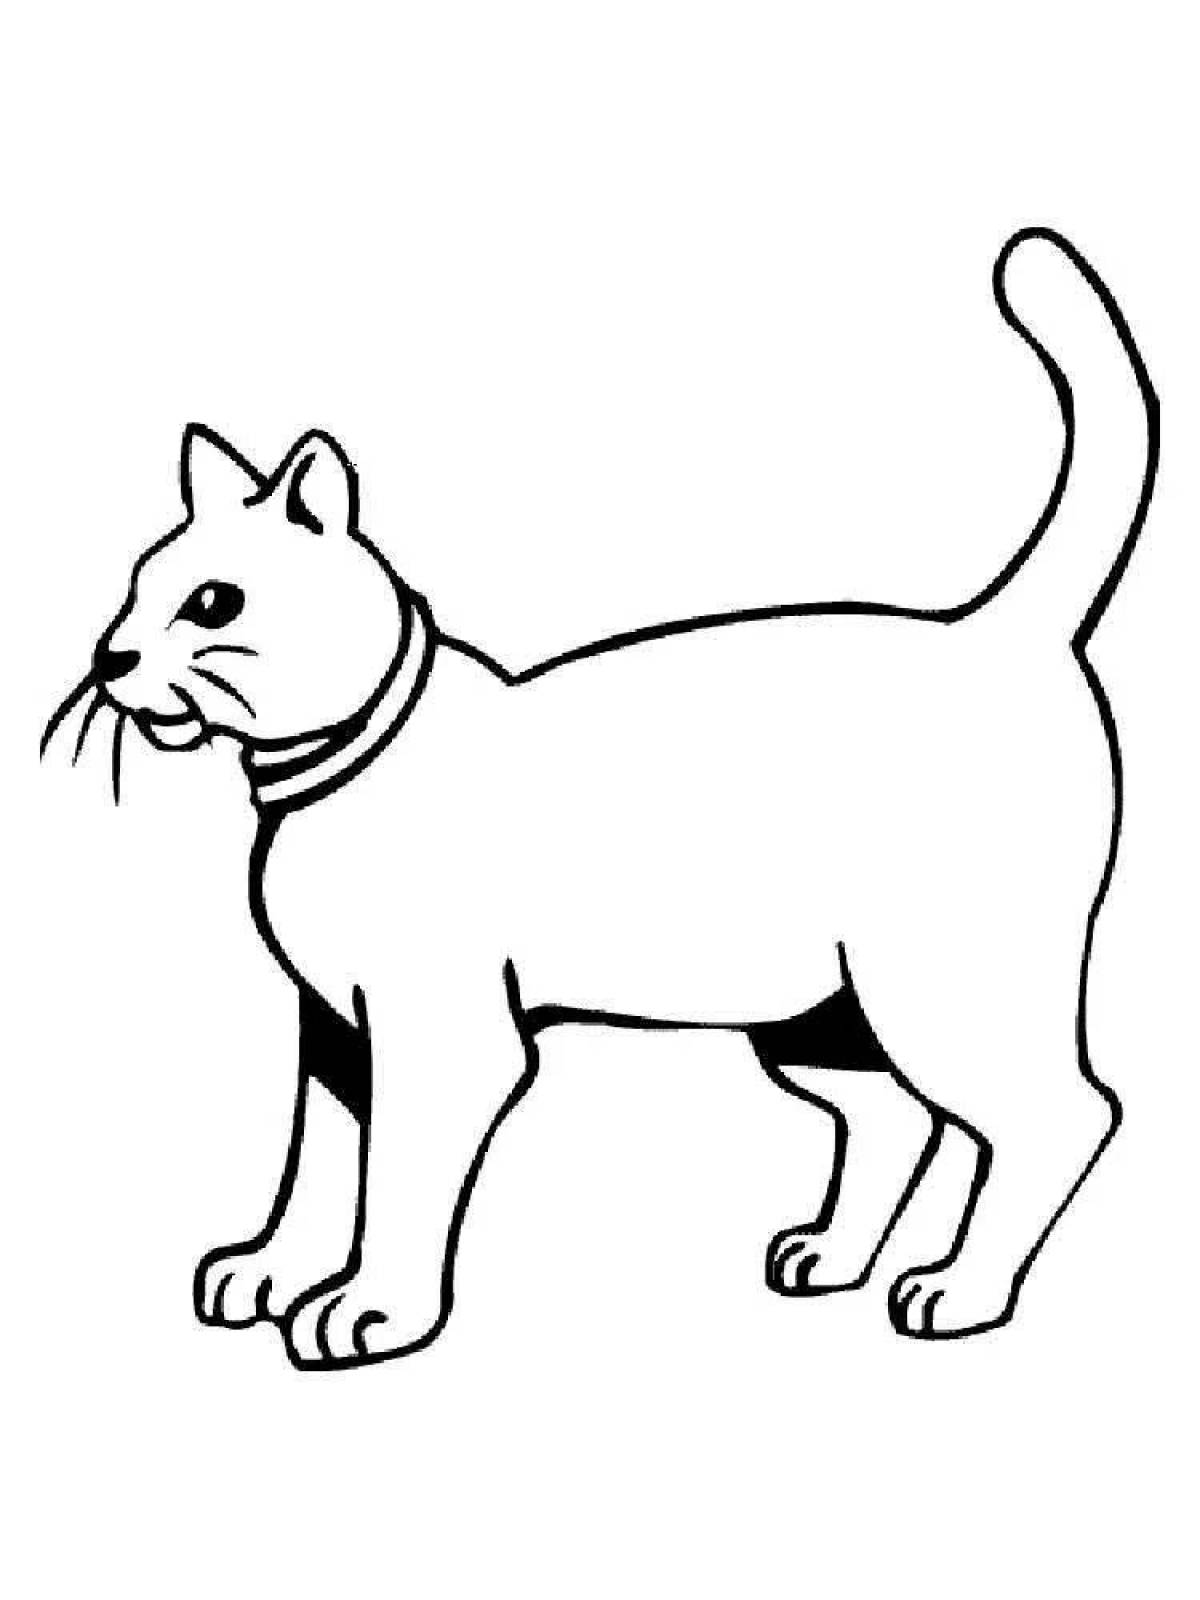 Adorable dog and cat coloring pages for kids